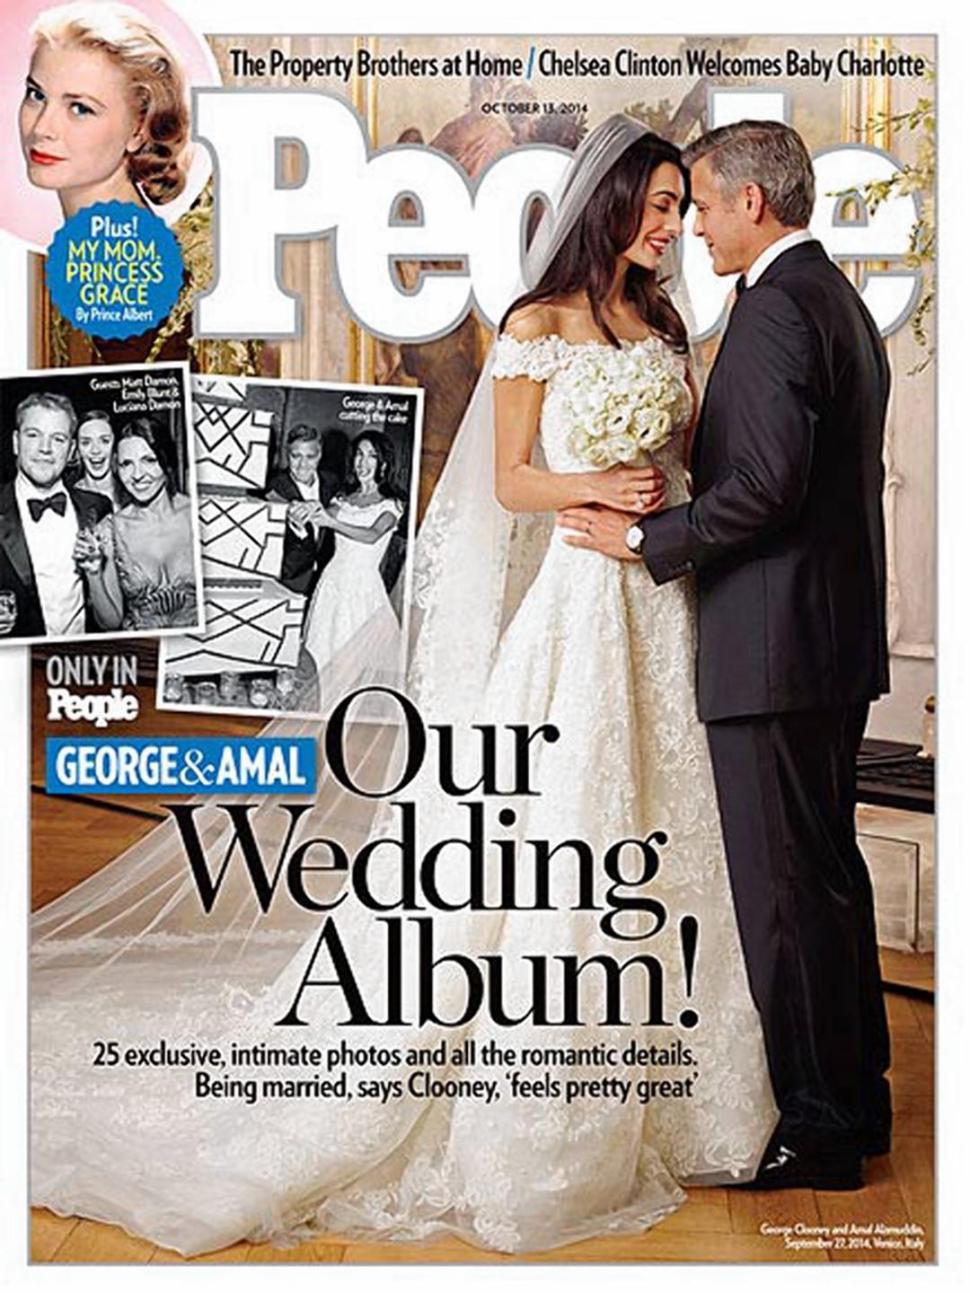 People's cover features pictures from the George Clooney and Amal Alamuddin wedding.